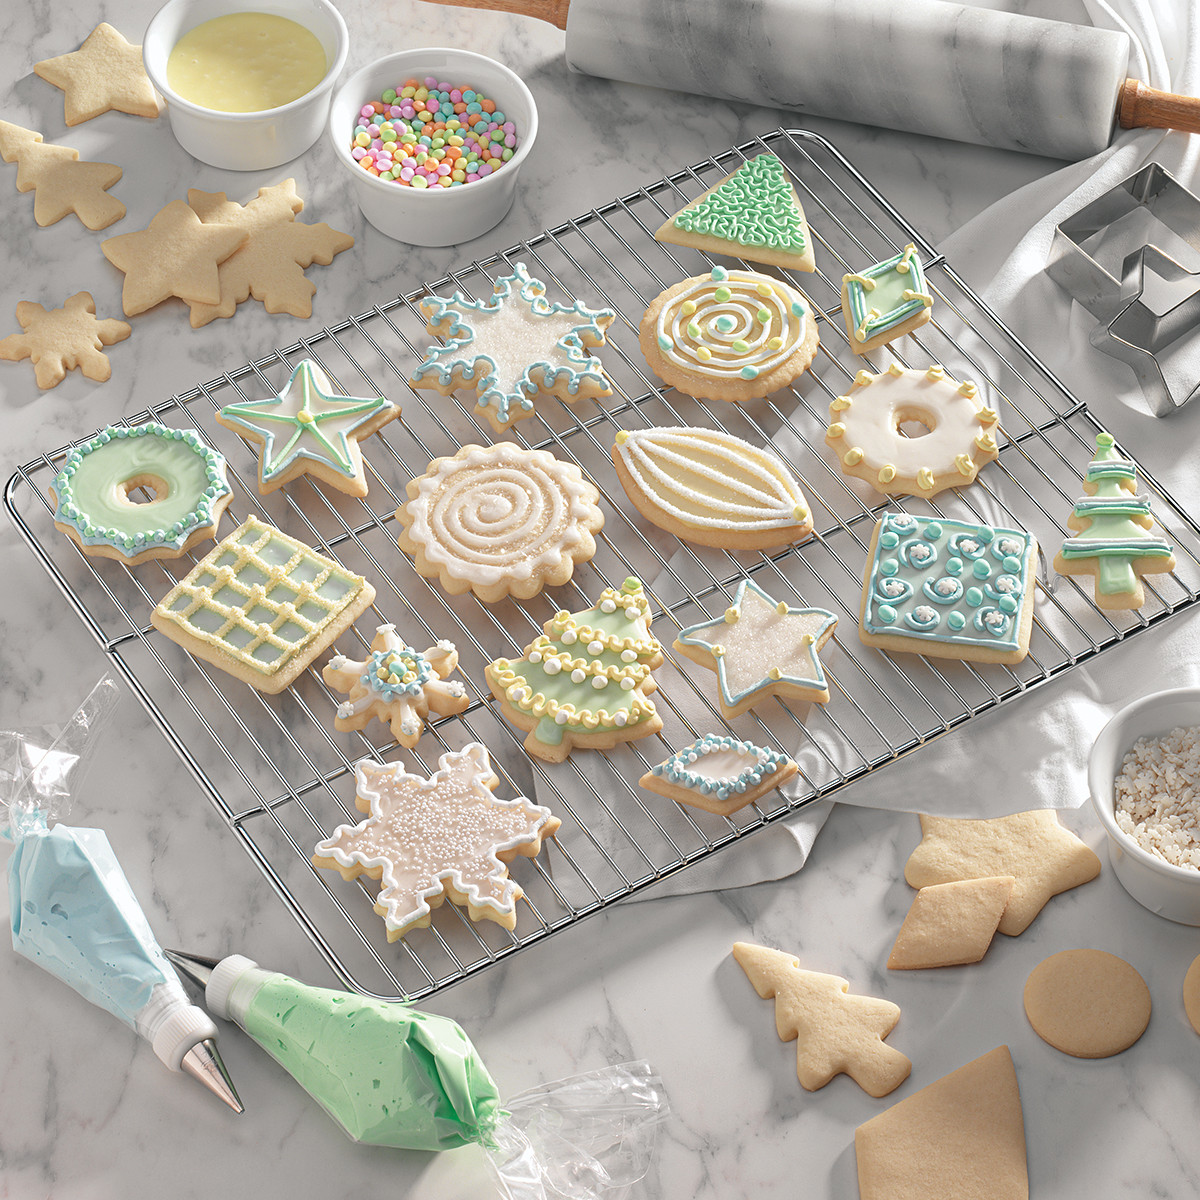 Christmas Cookies Decorated
 9 Easy Christmas Cookie Decorating Ideas